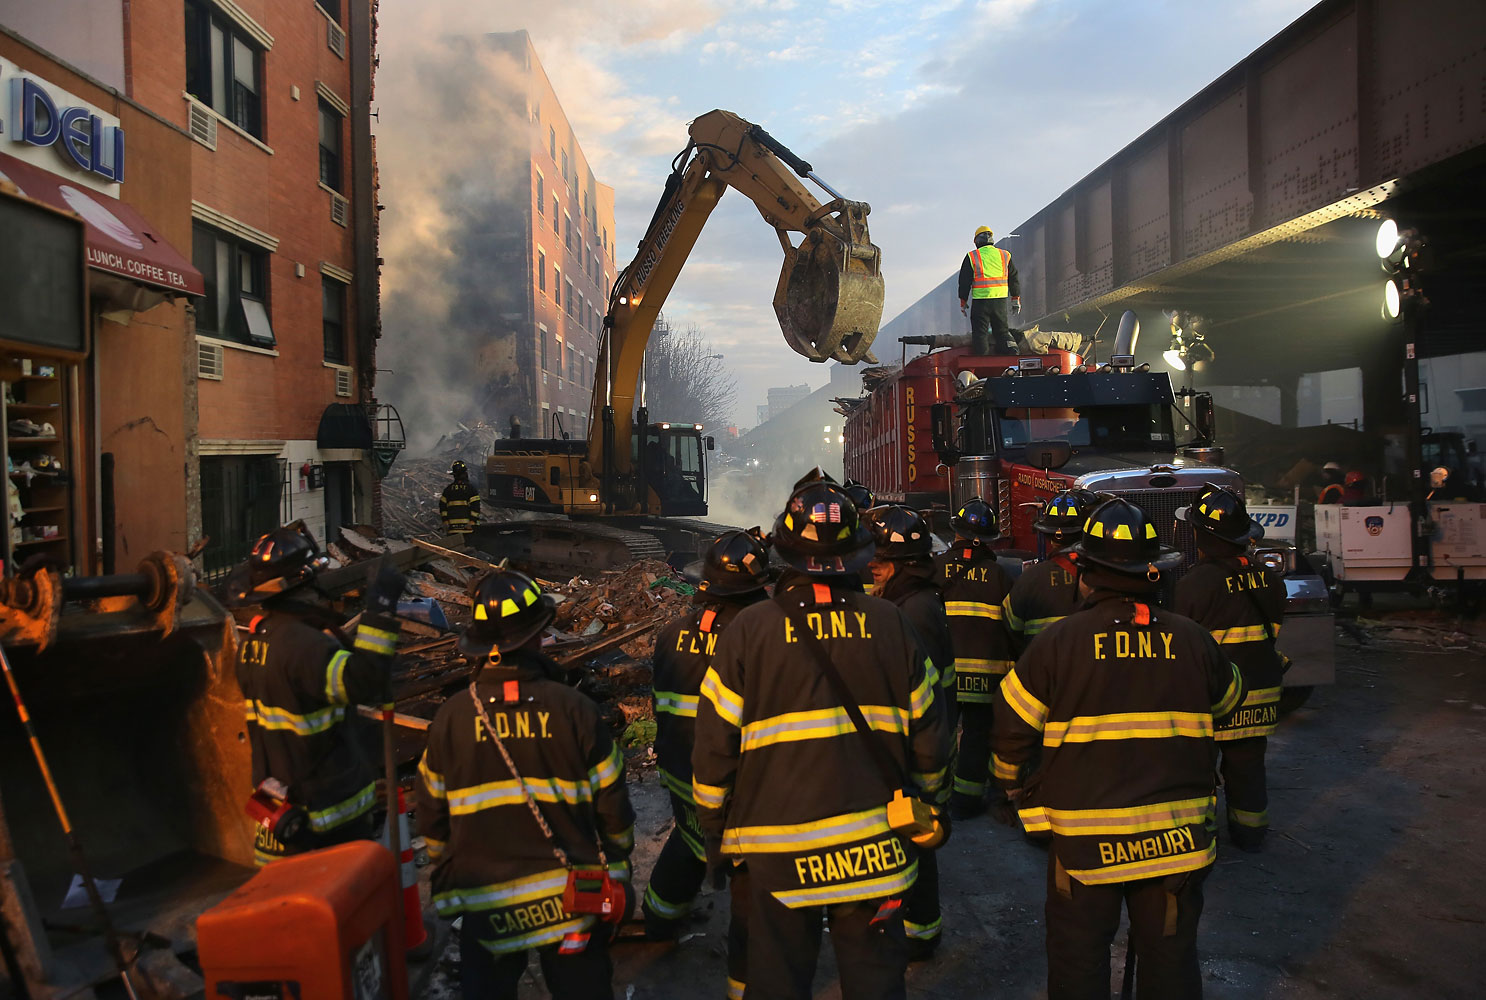 NEW YORK, NY - MARCH 13:  Firemen watch as work crews remove debris from the site of an explosion in East Harlem on March 13, 2014 in New York City. At least 7 people were killed, according to reports, in Wednesday's explosion which collapsed two buildings on Park Avenue at 116th Street. (John Moore—Getty Images)